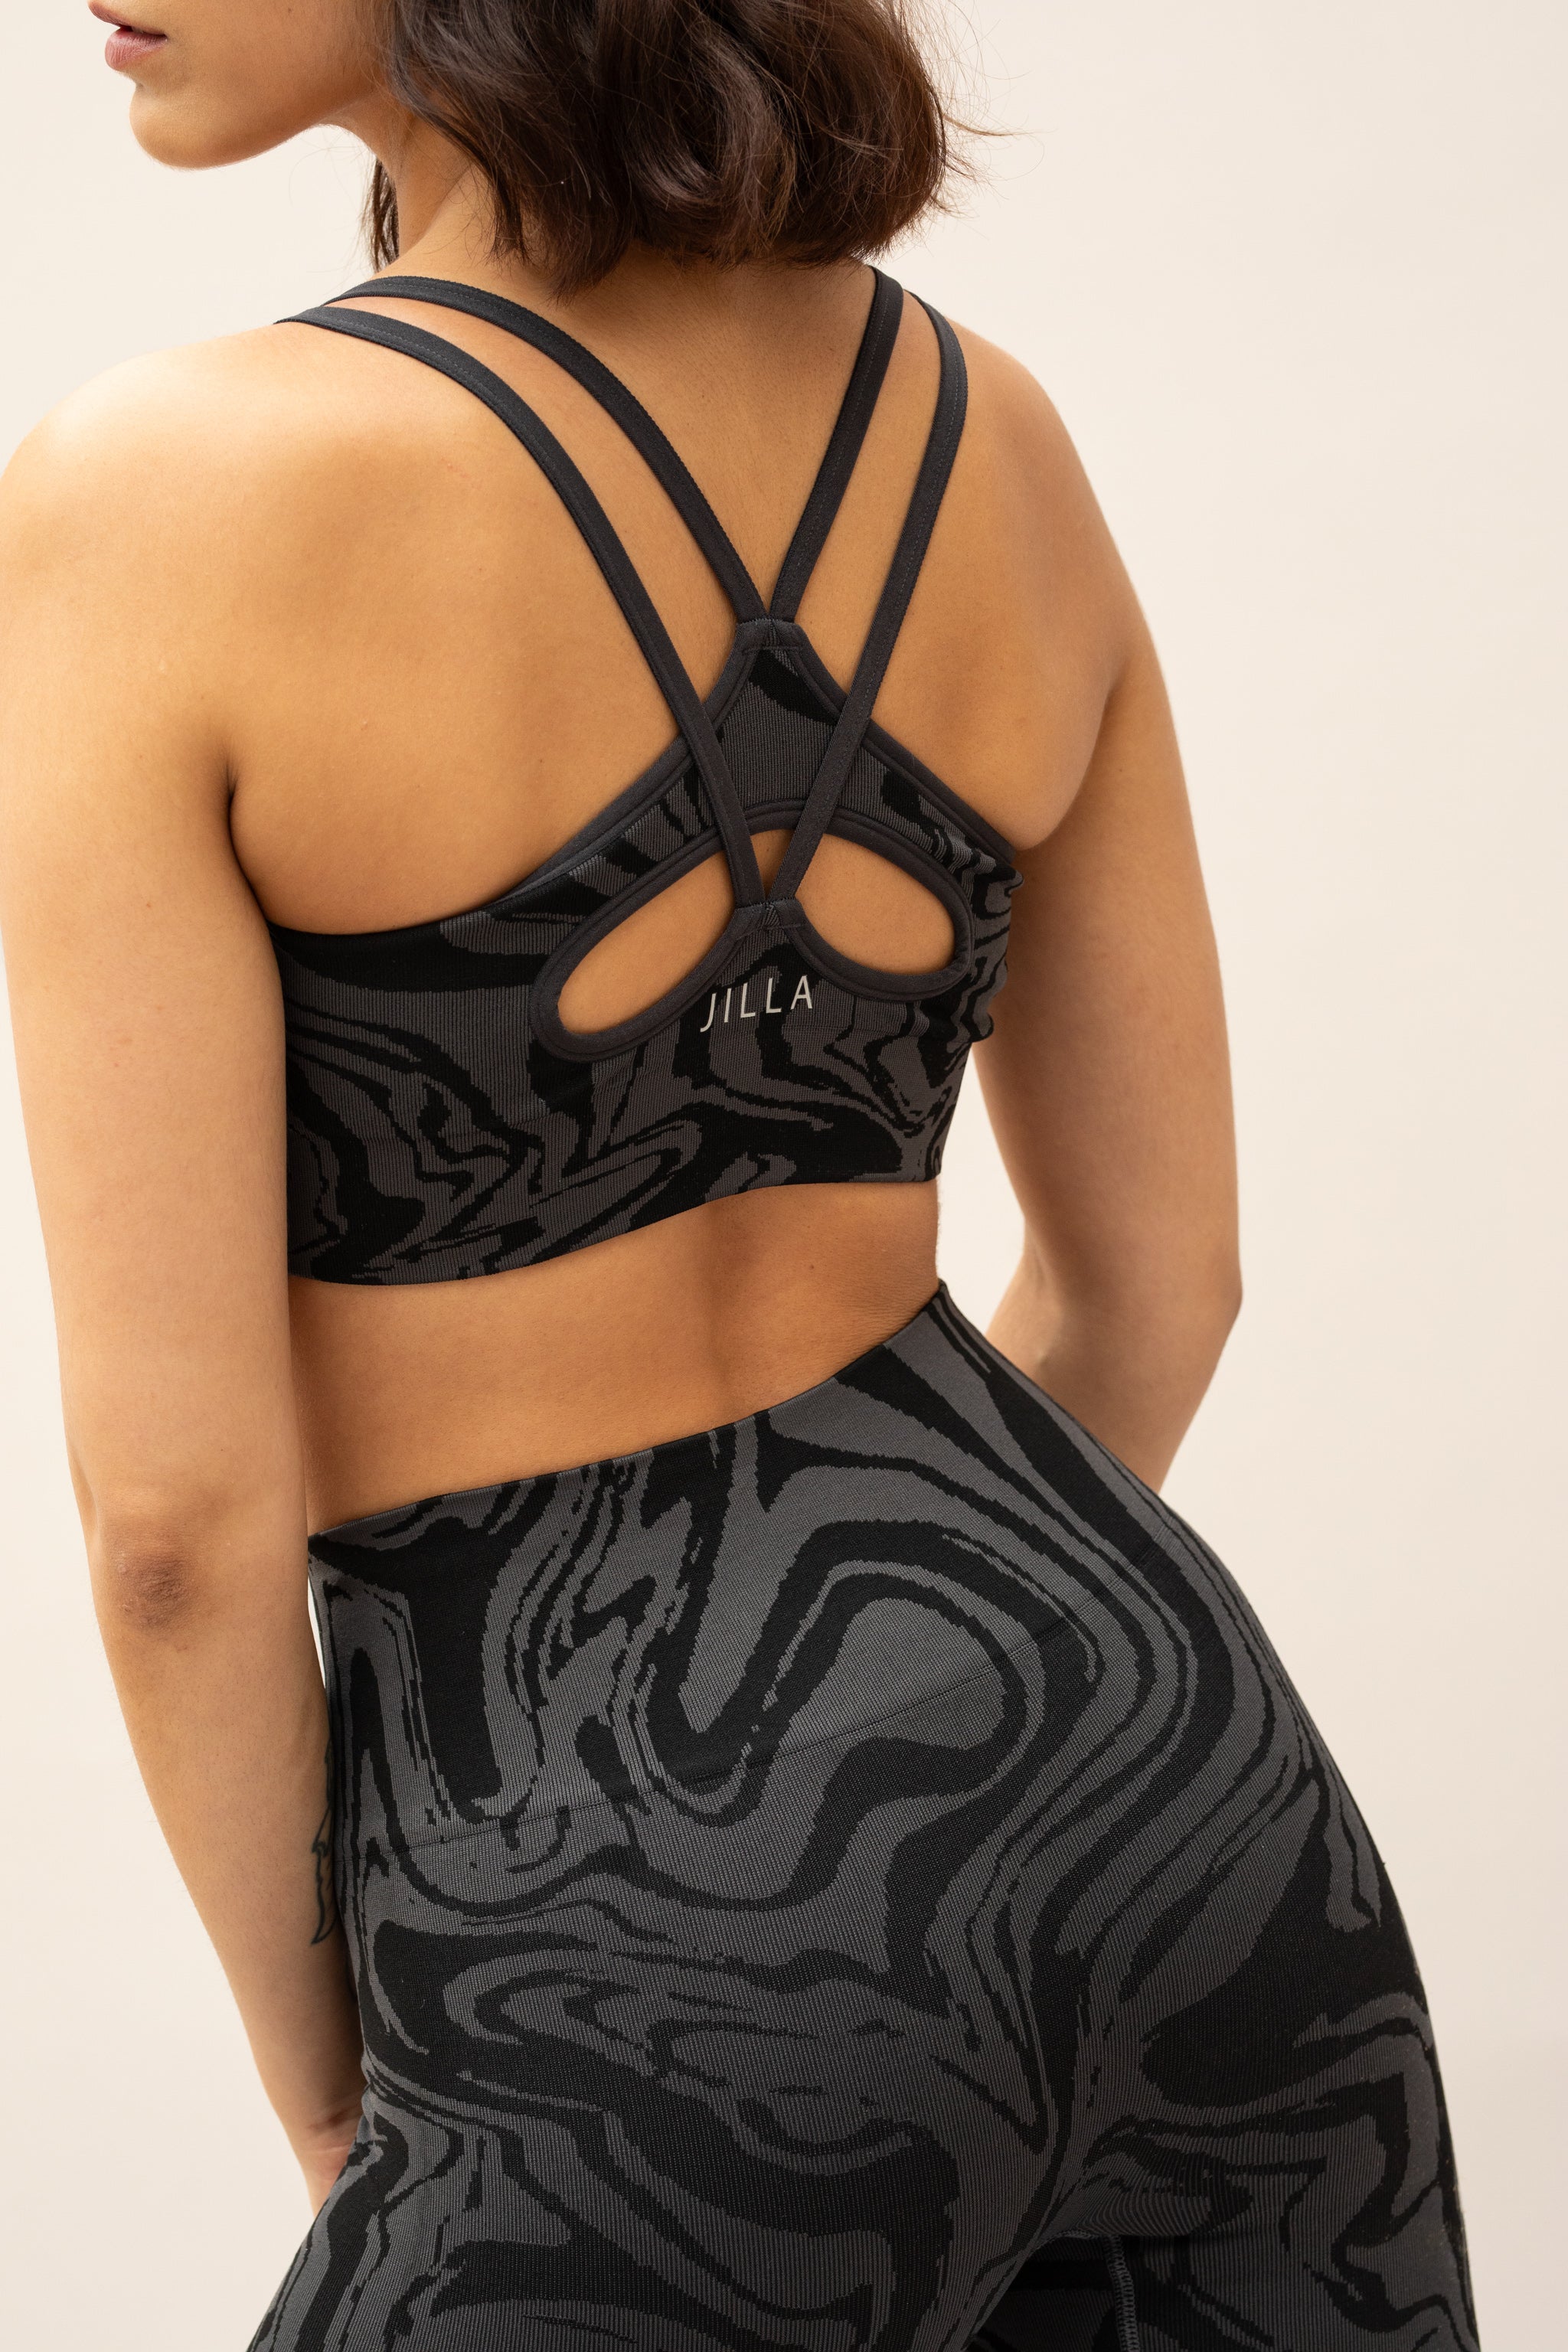 Black and grey marble effect recycled supportive sports bra with leggings by sustainable women's activewear brand Jilla. 